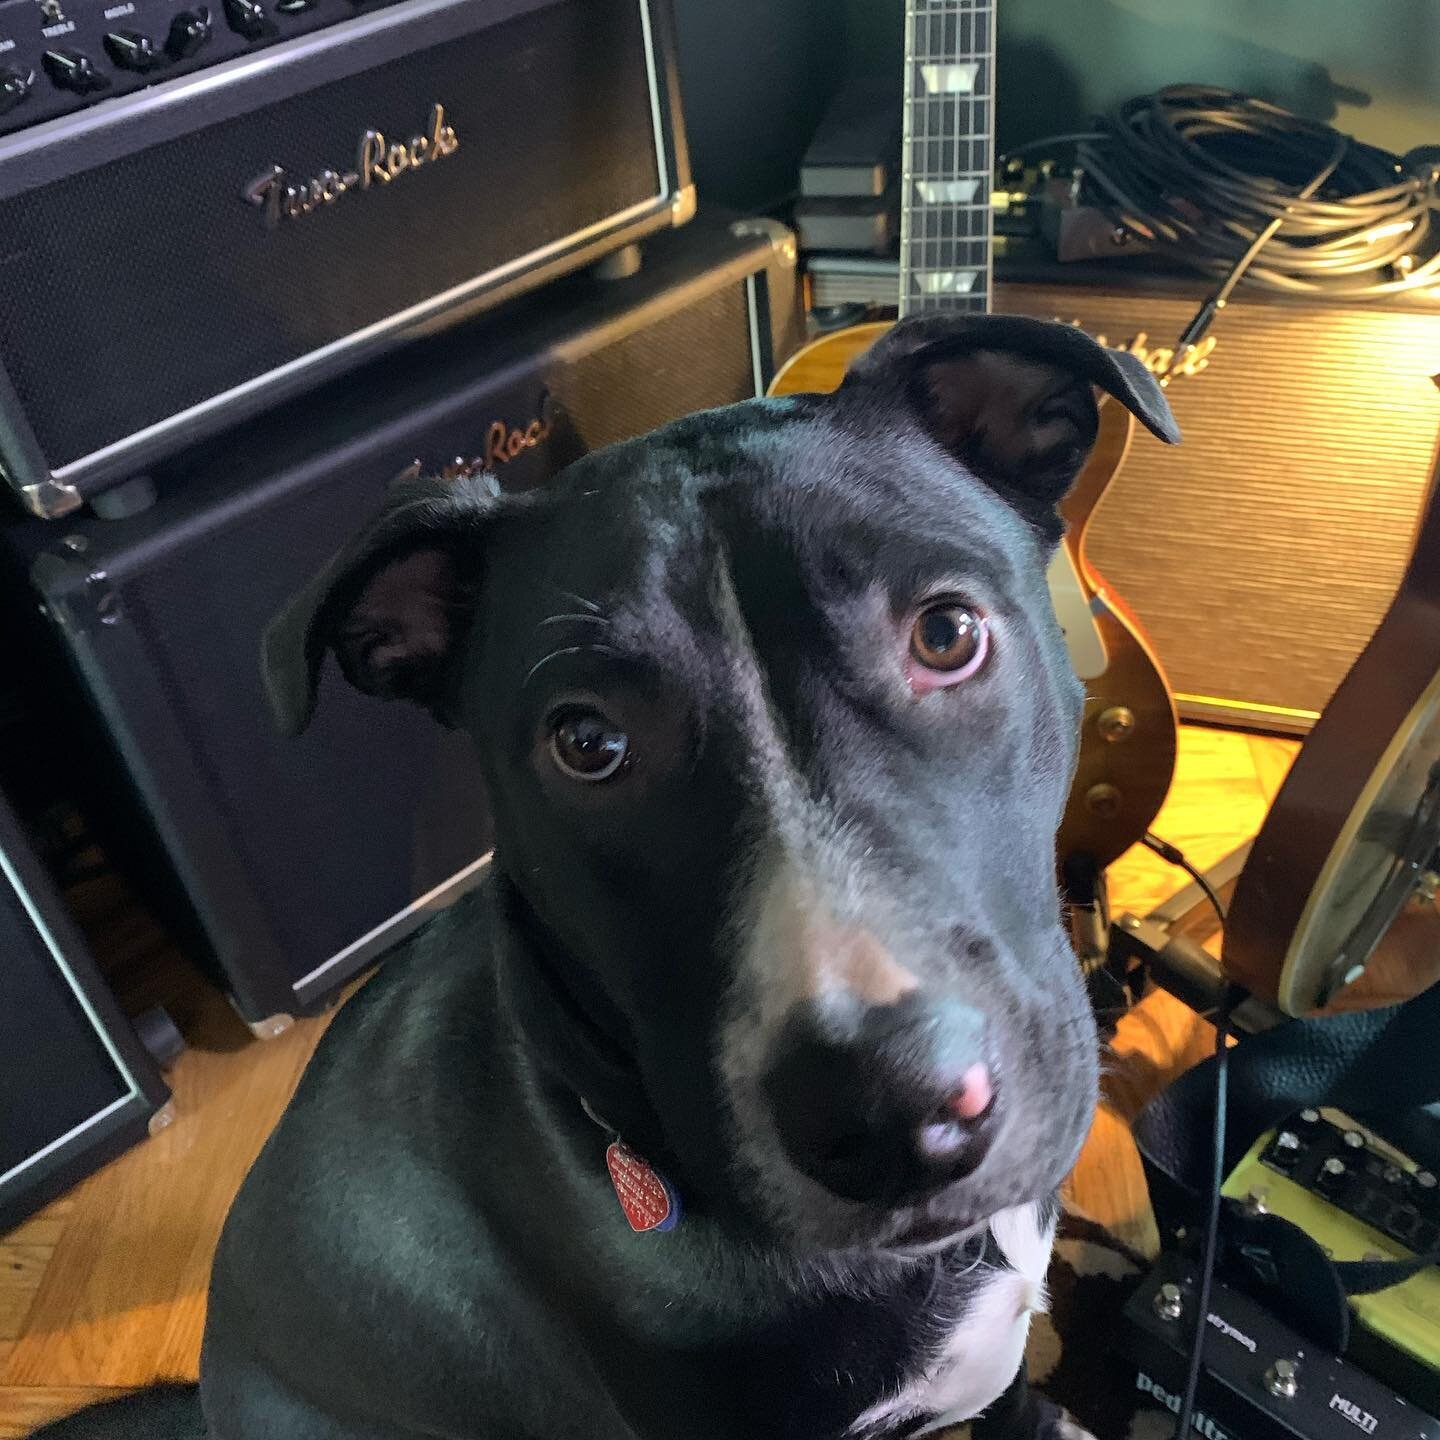 Bo is favoring the Les Paul and Classic Reverb Signature today. #smellthetone #tworockamps #animalrescue  #bo #lespaul #historicmakeovers